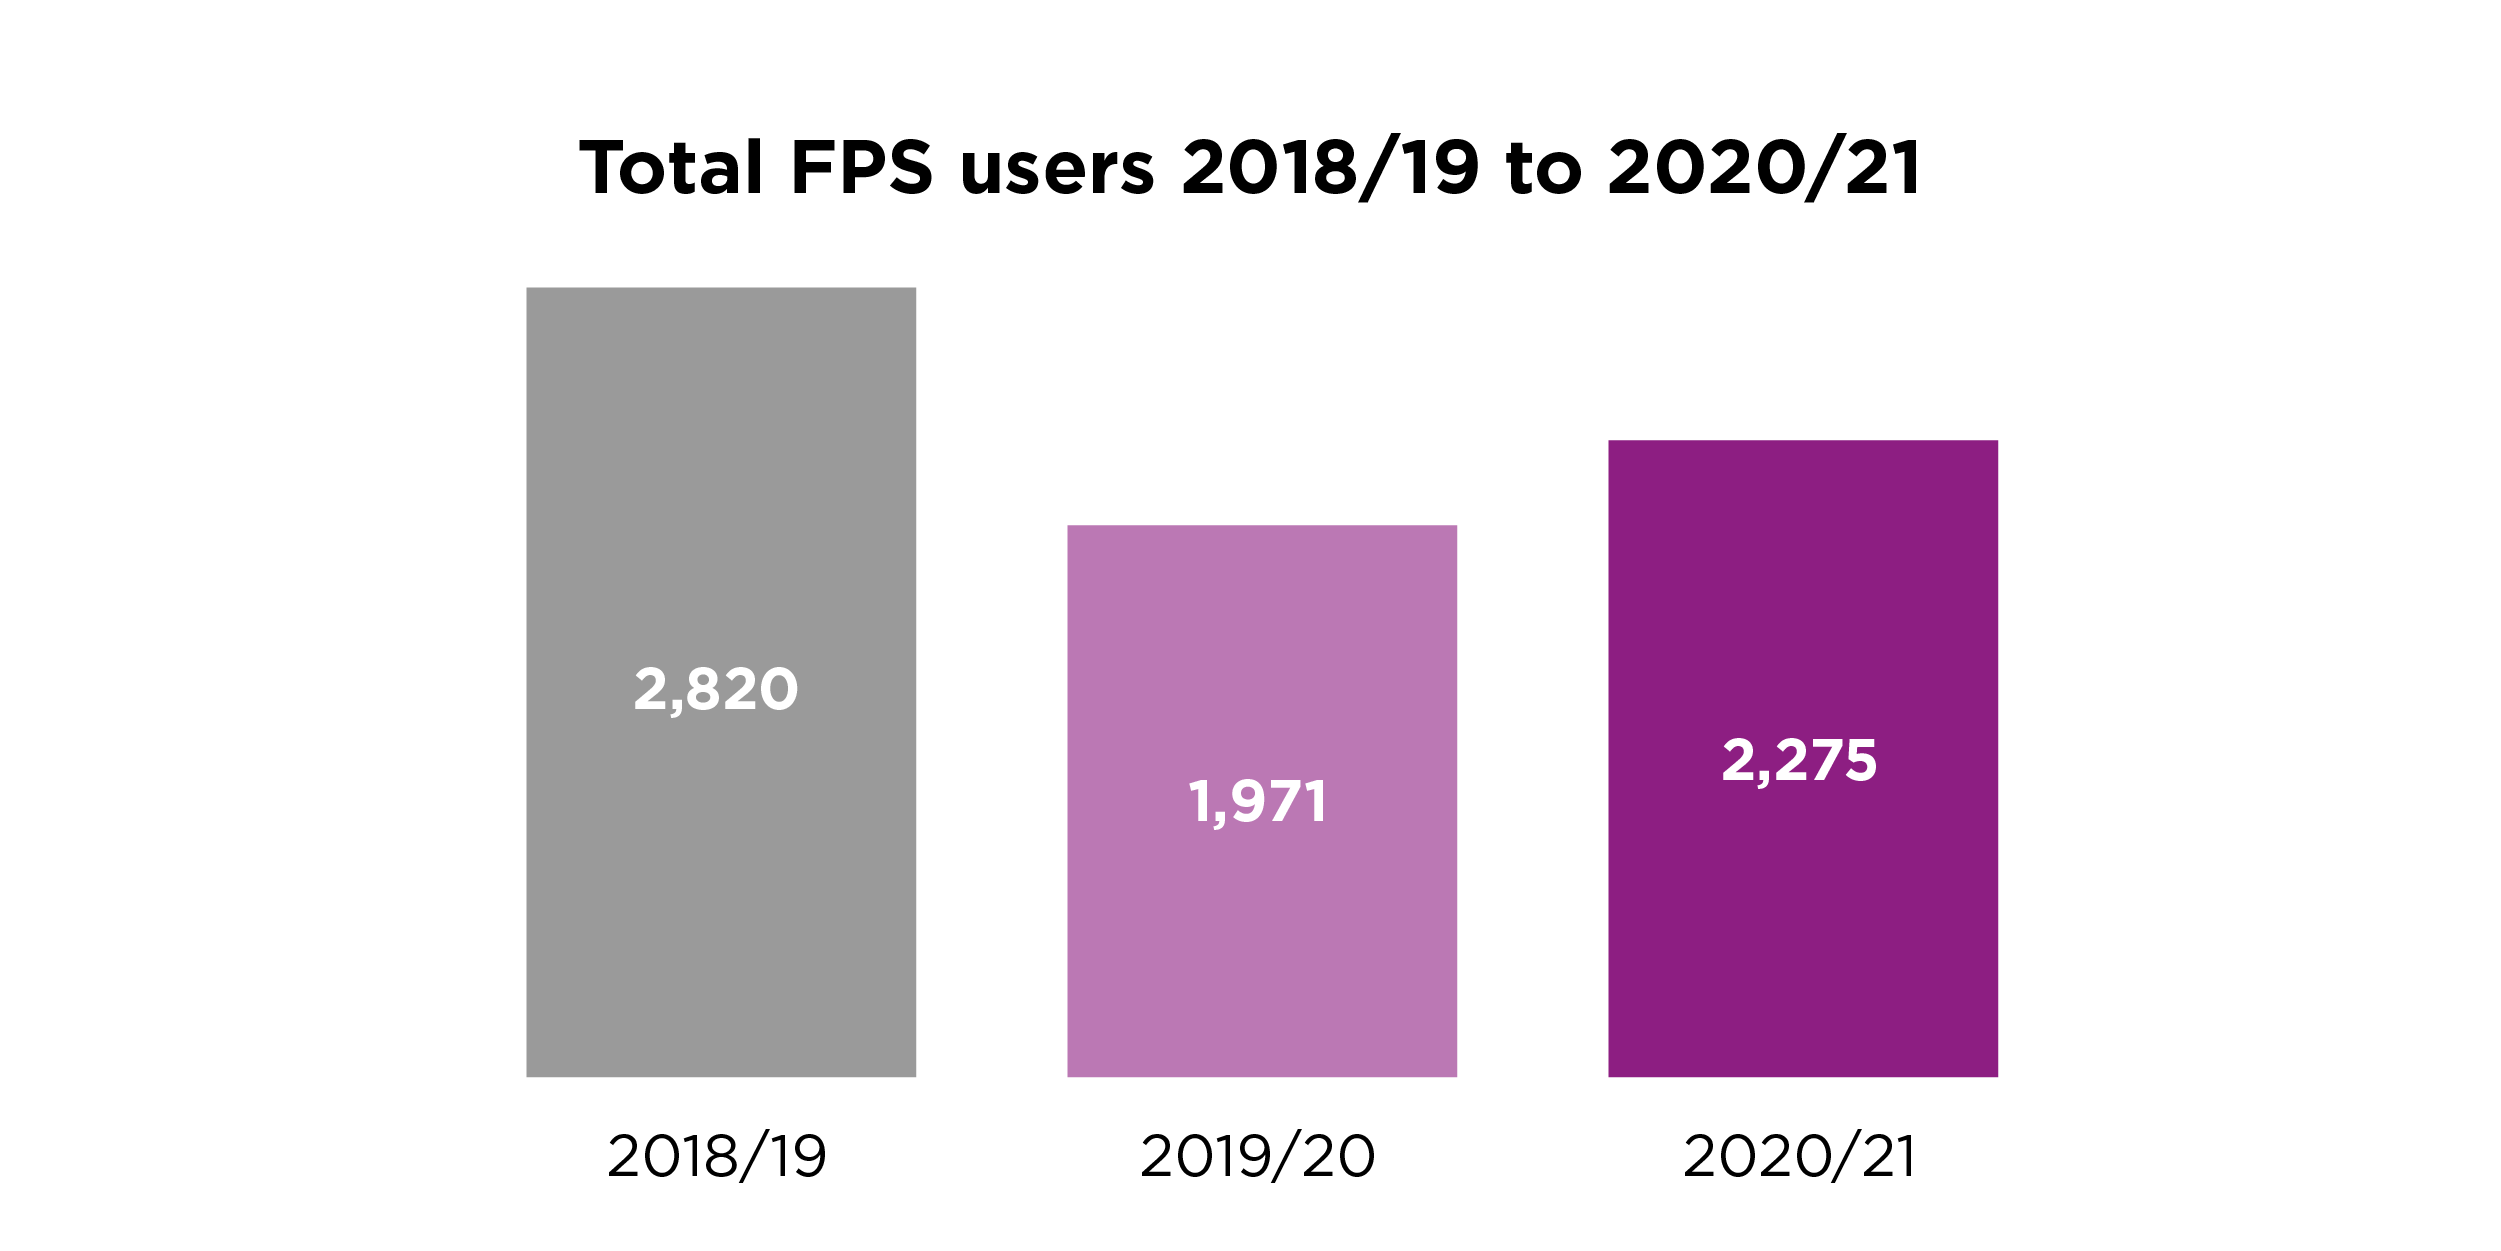 Graphic showing total FPS users 2018/19 to 2020/21